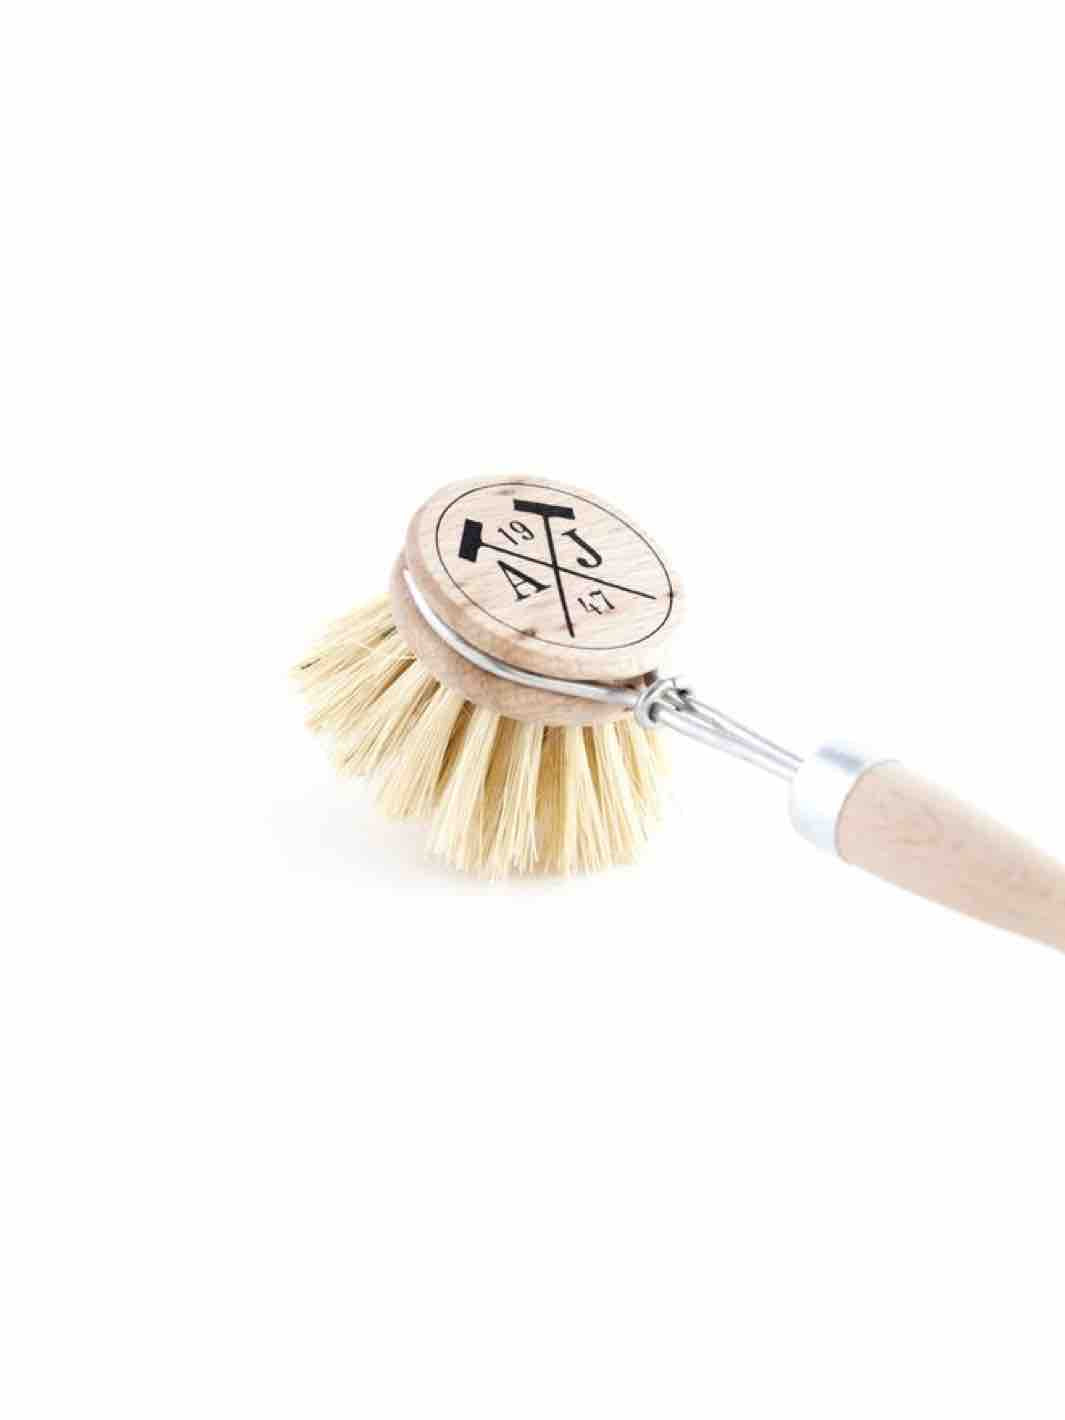 Everneat Dish Brush with Handle